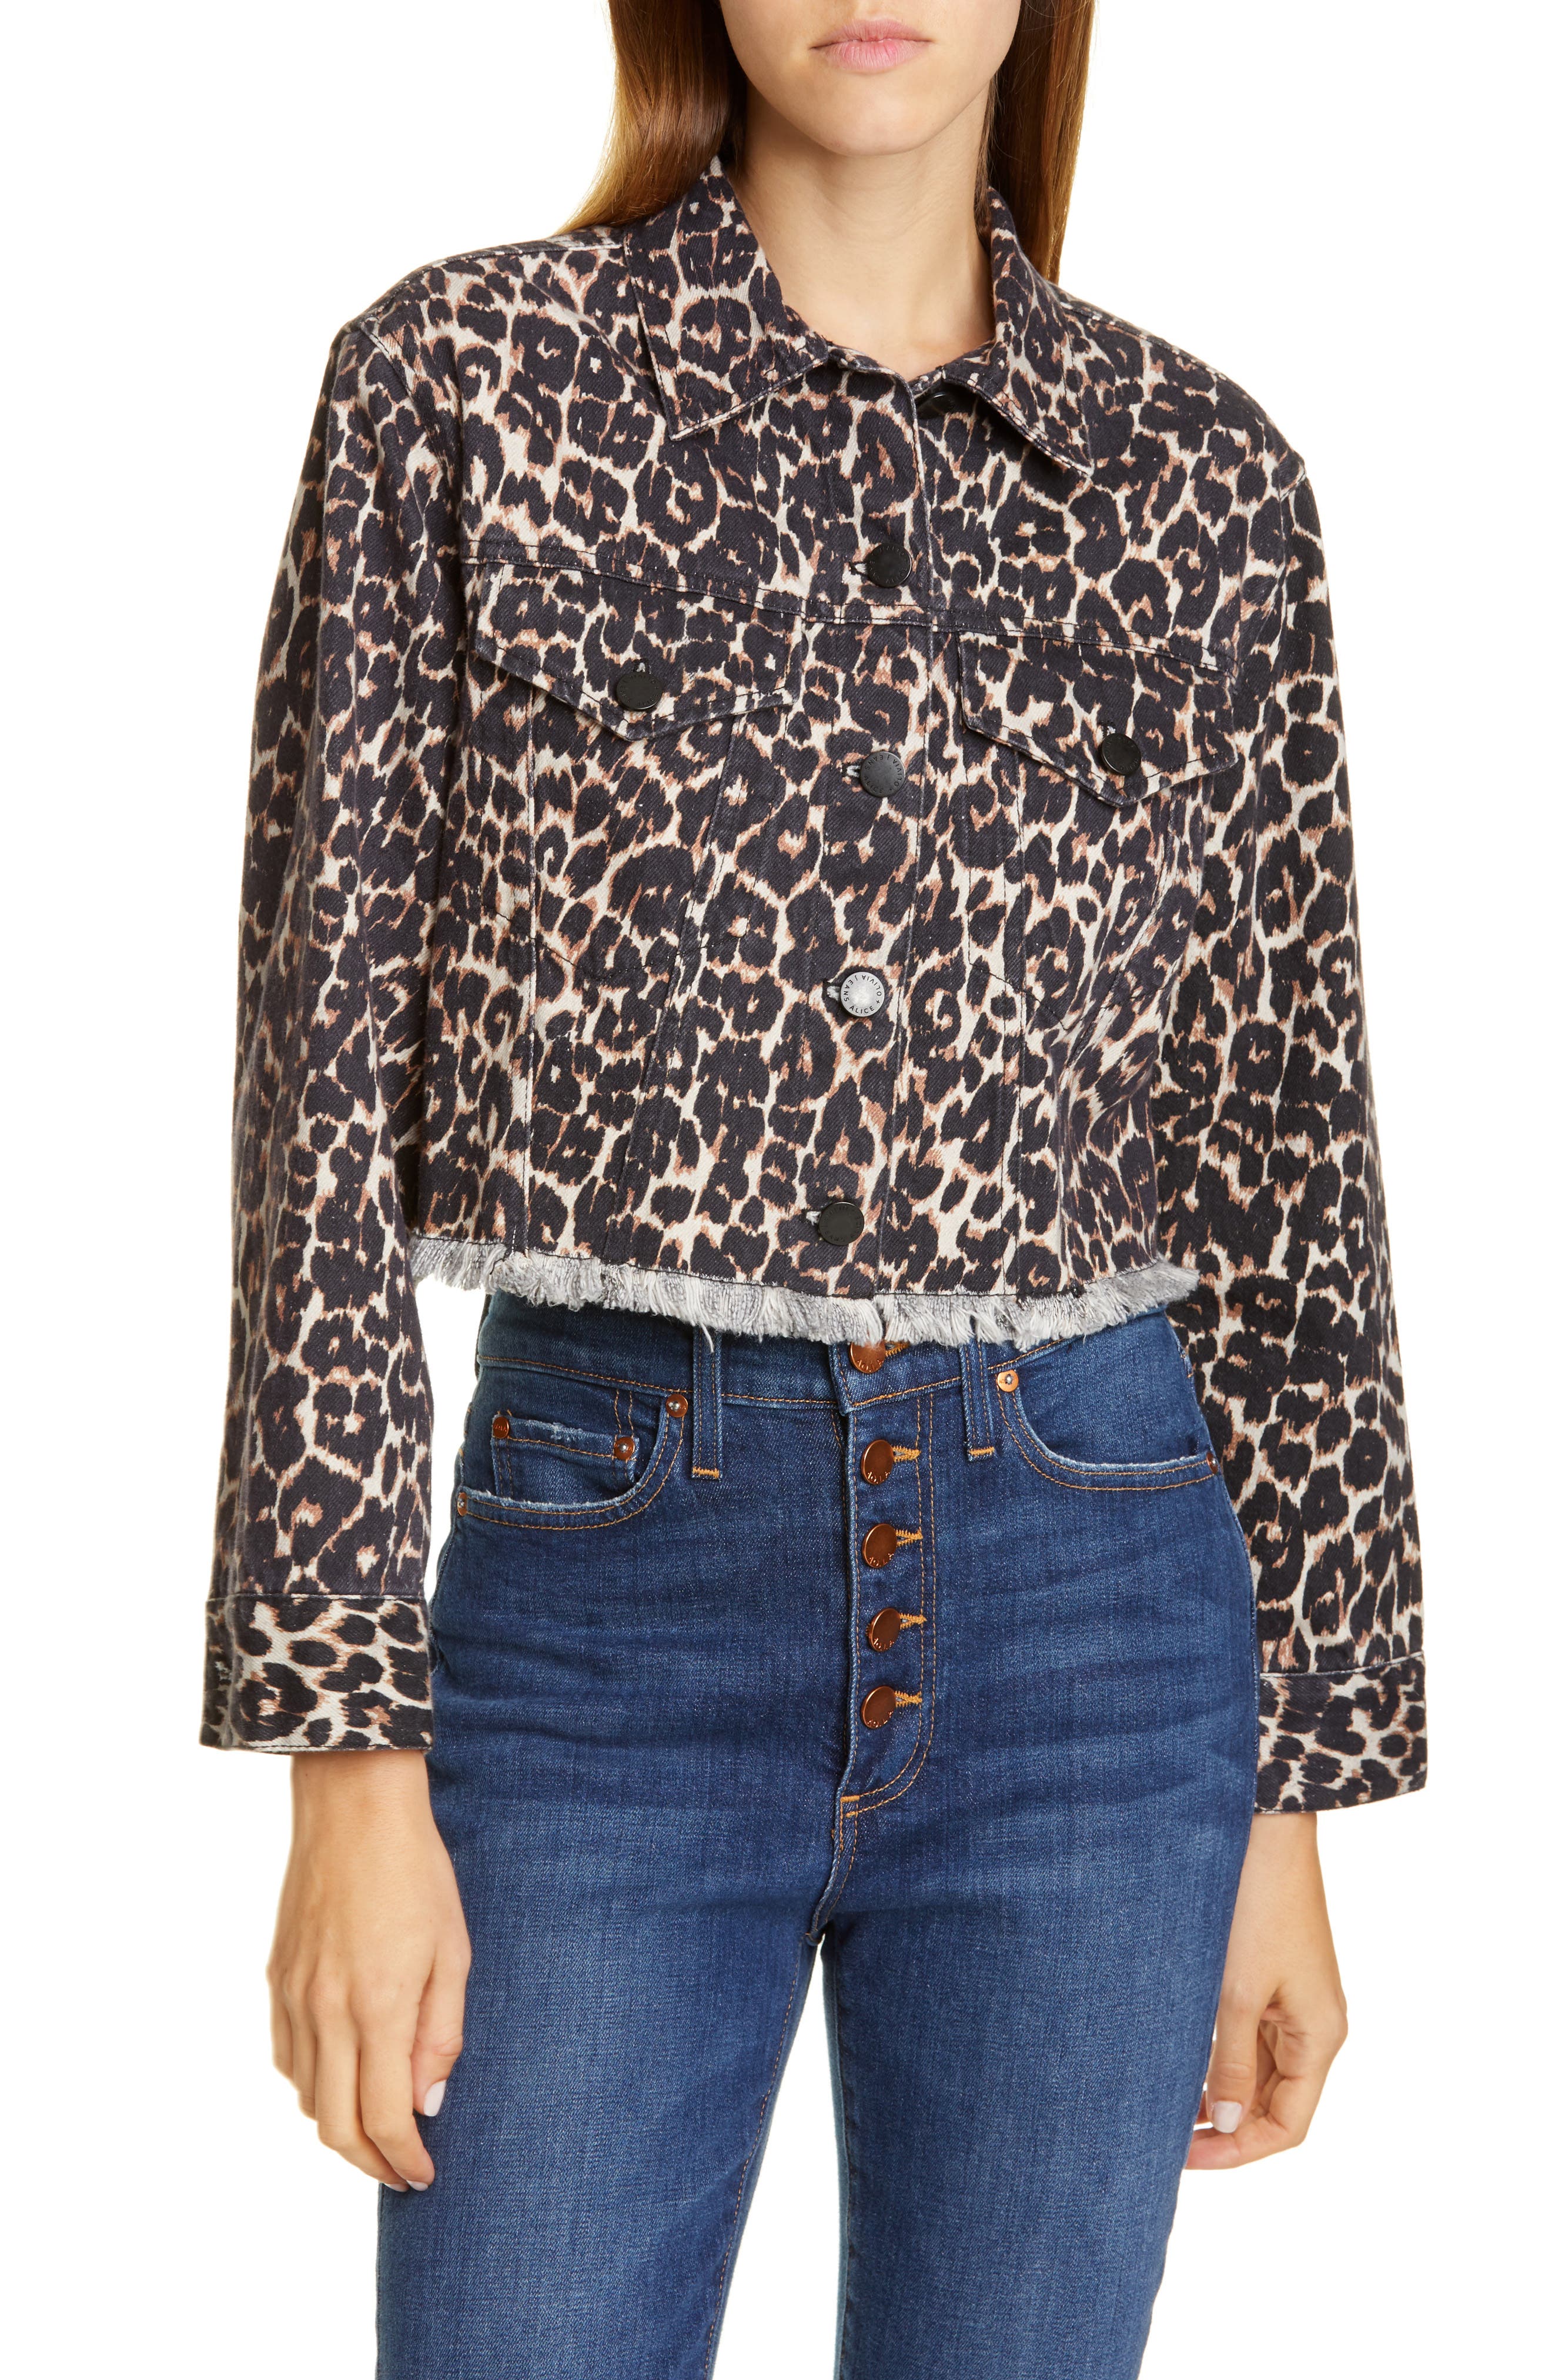 jeans with leopard print cuff